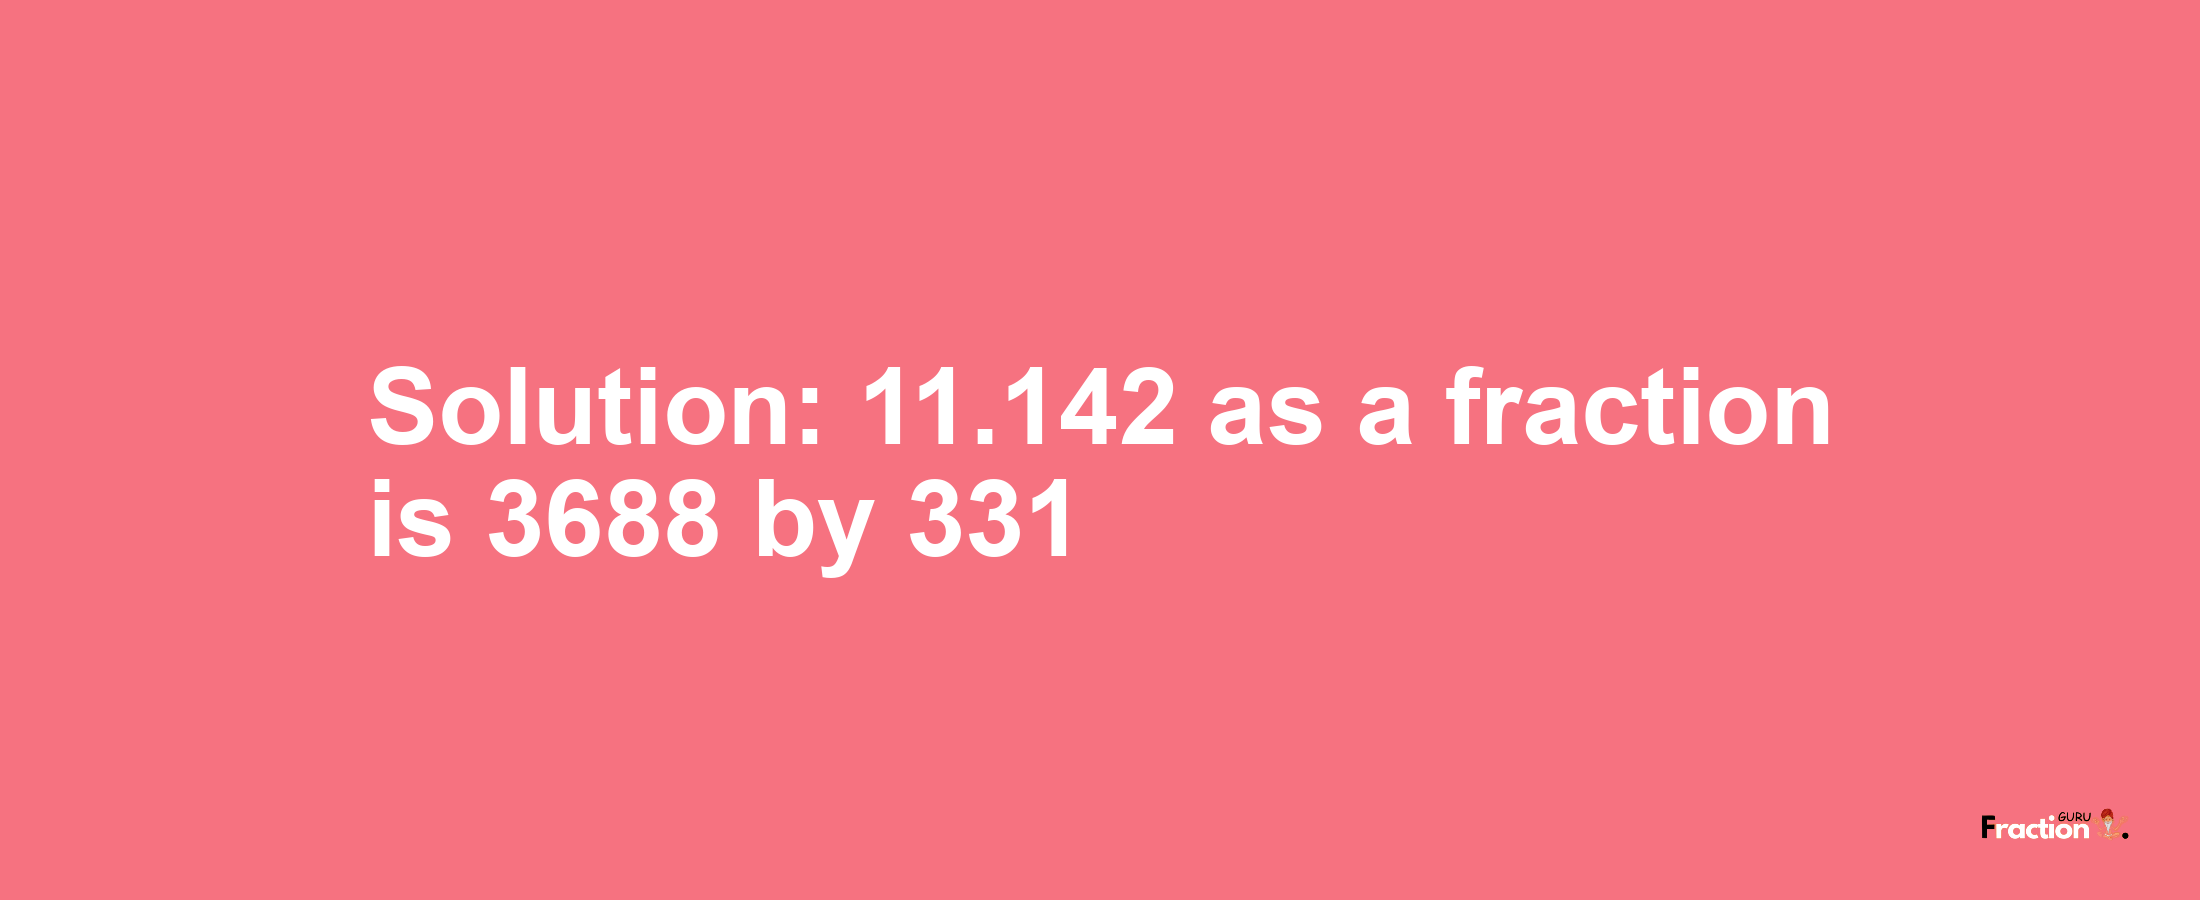 Solution:11.142 as a fraction is 3688/331